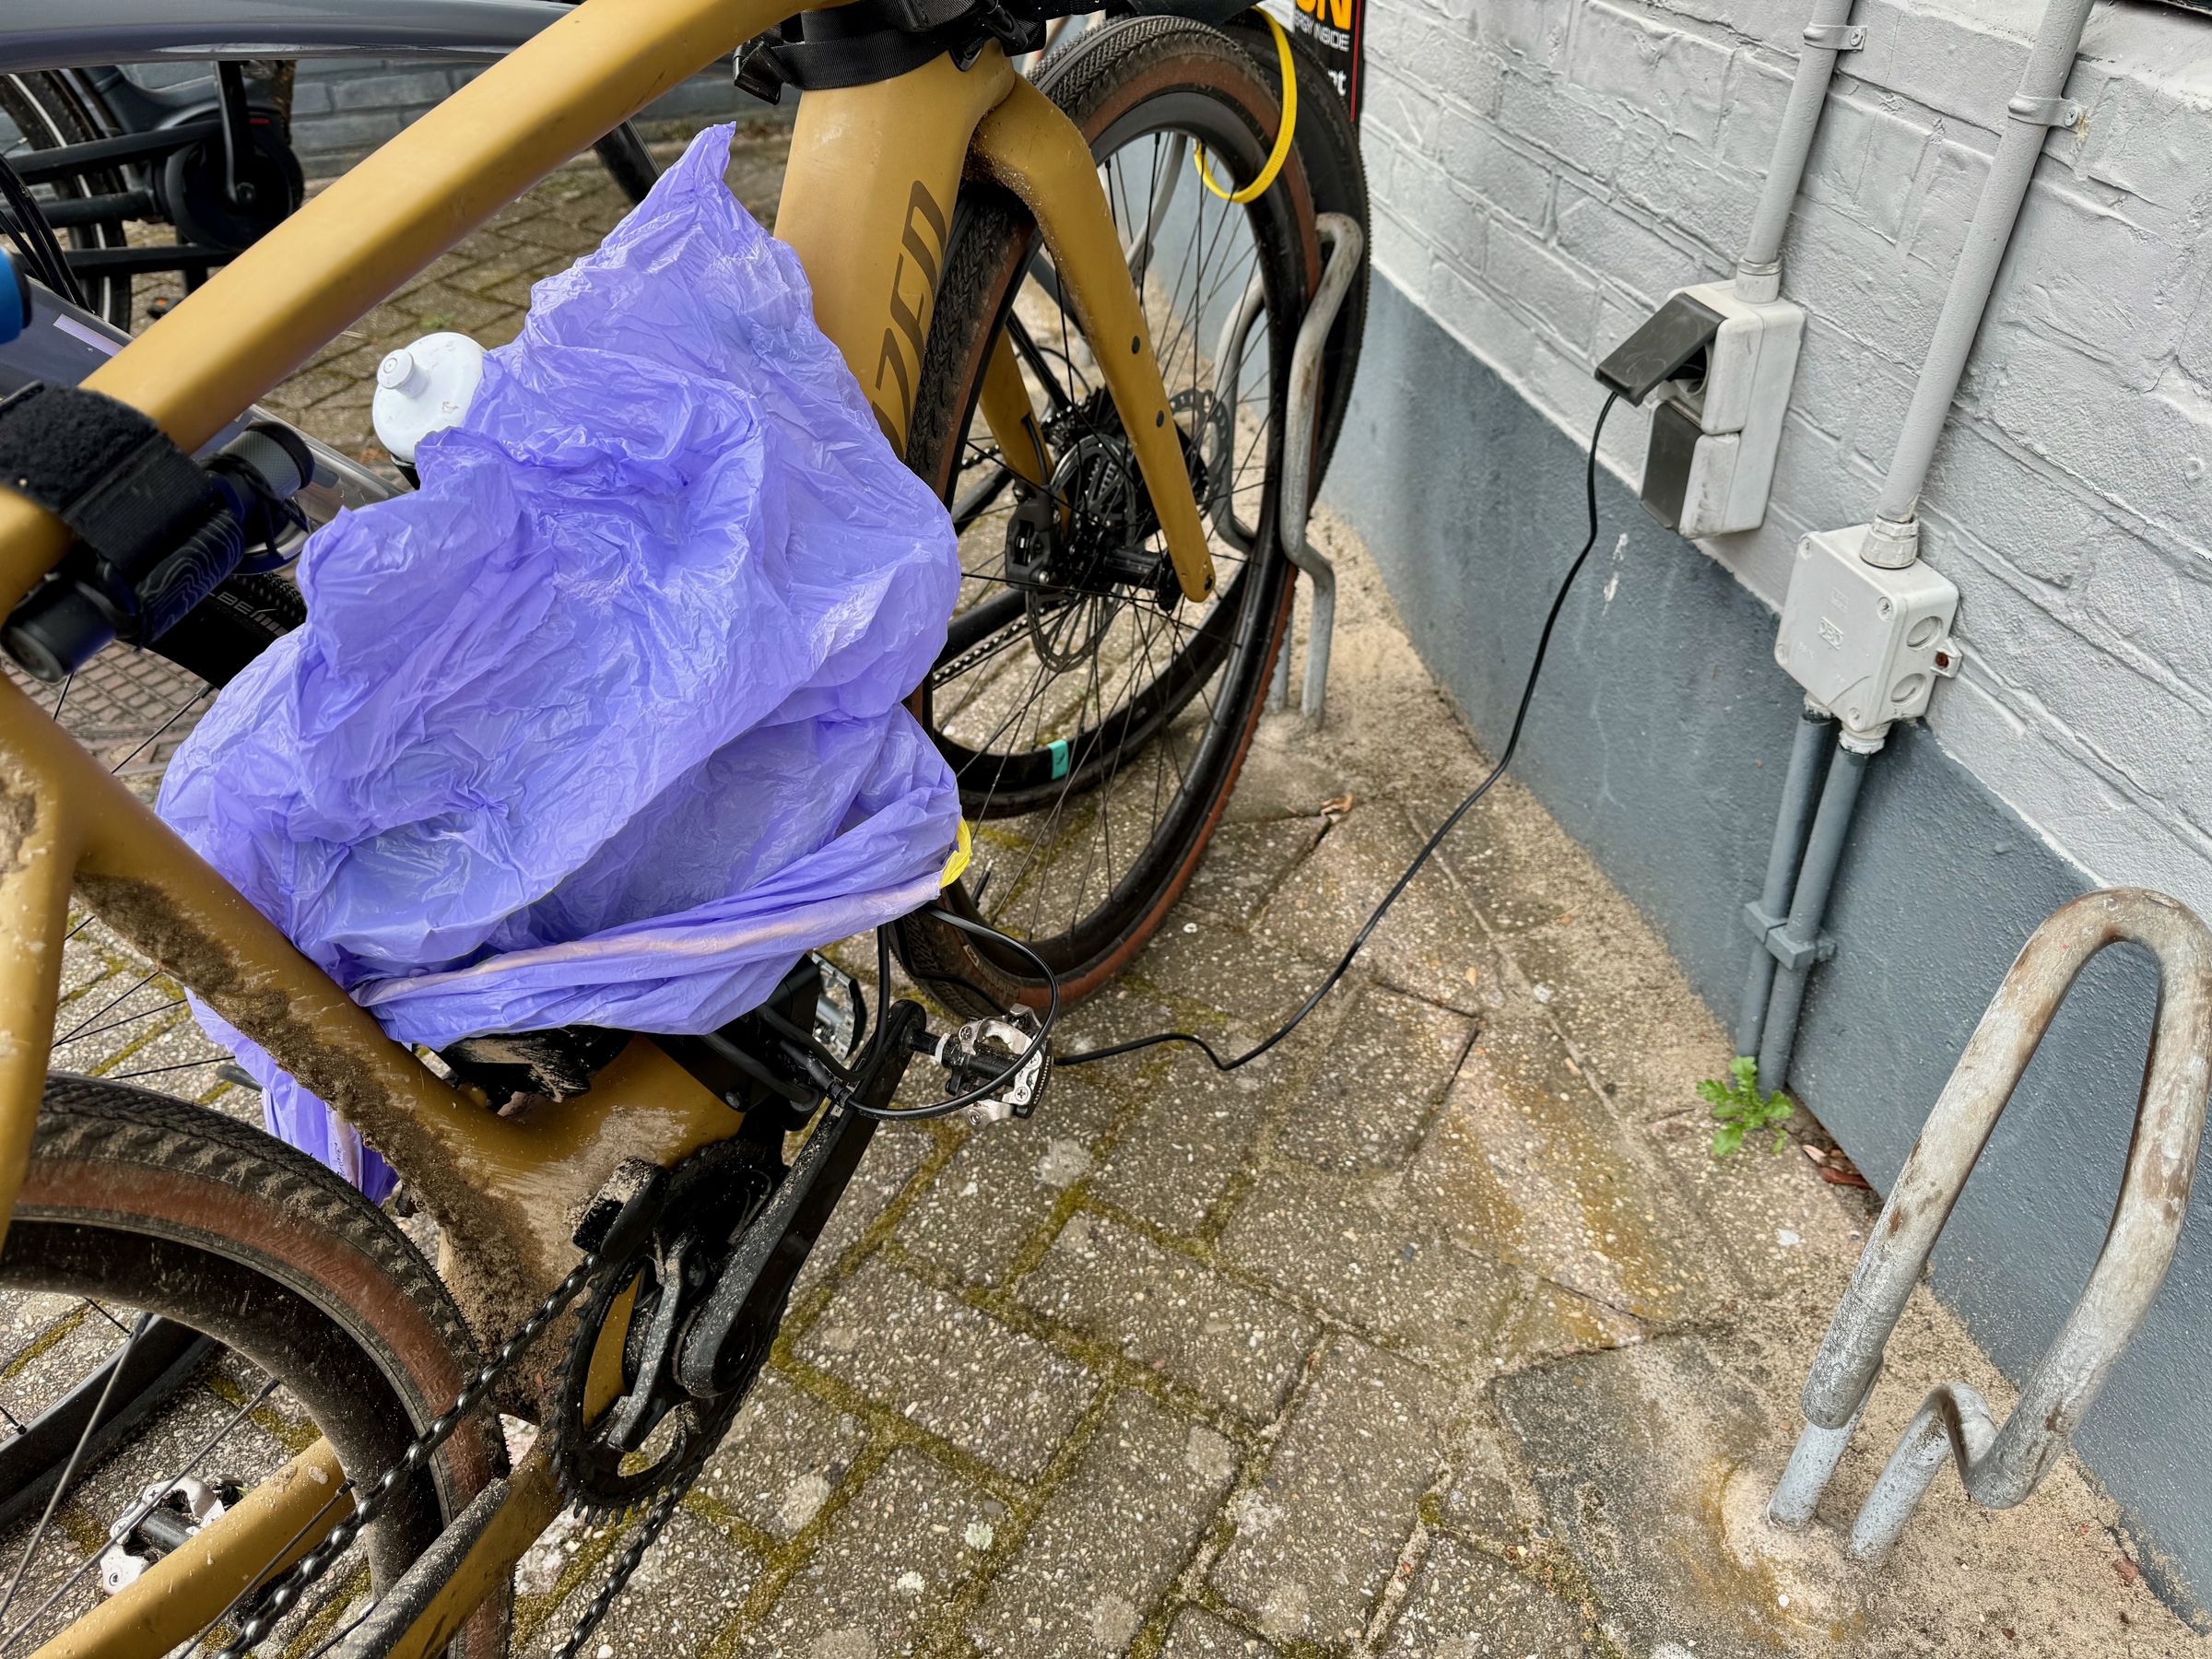 <em>Another cafe offering free e-bike charging to customers. It was raining so I had to use a trash bag to cover the charging brick and the charging points on the bike and range extender.</em>